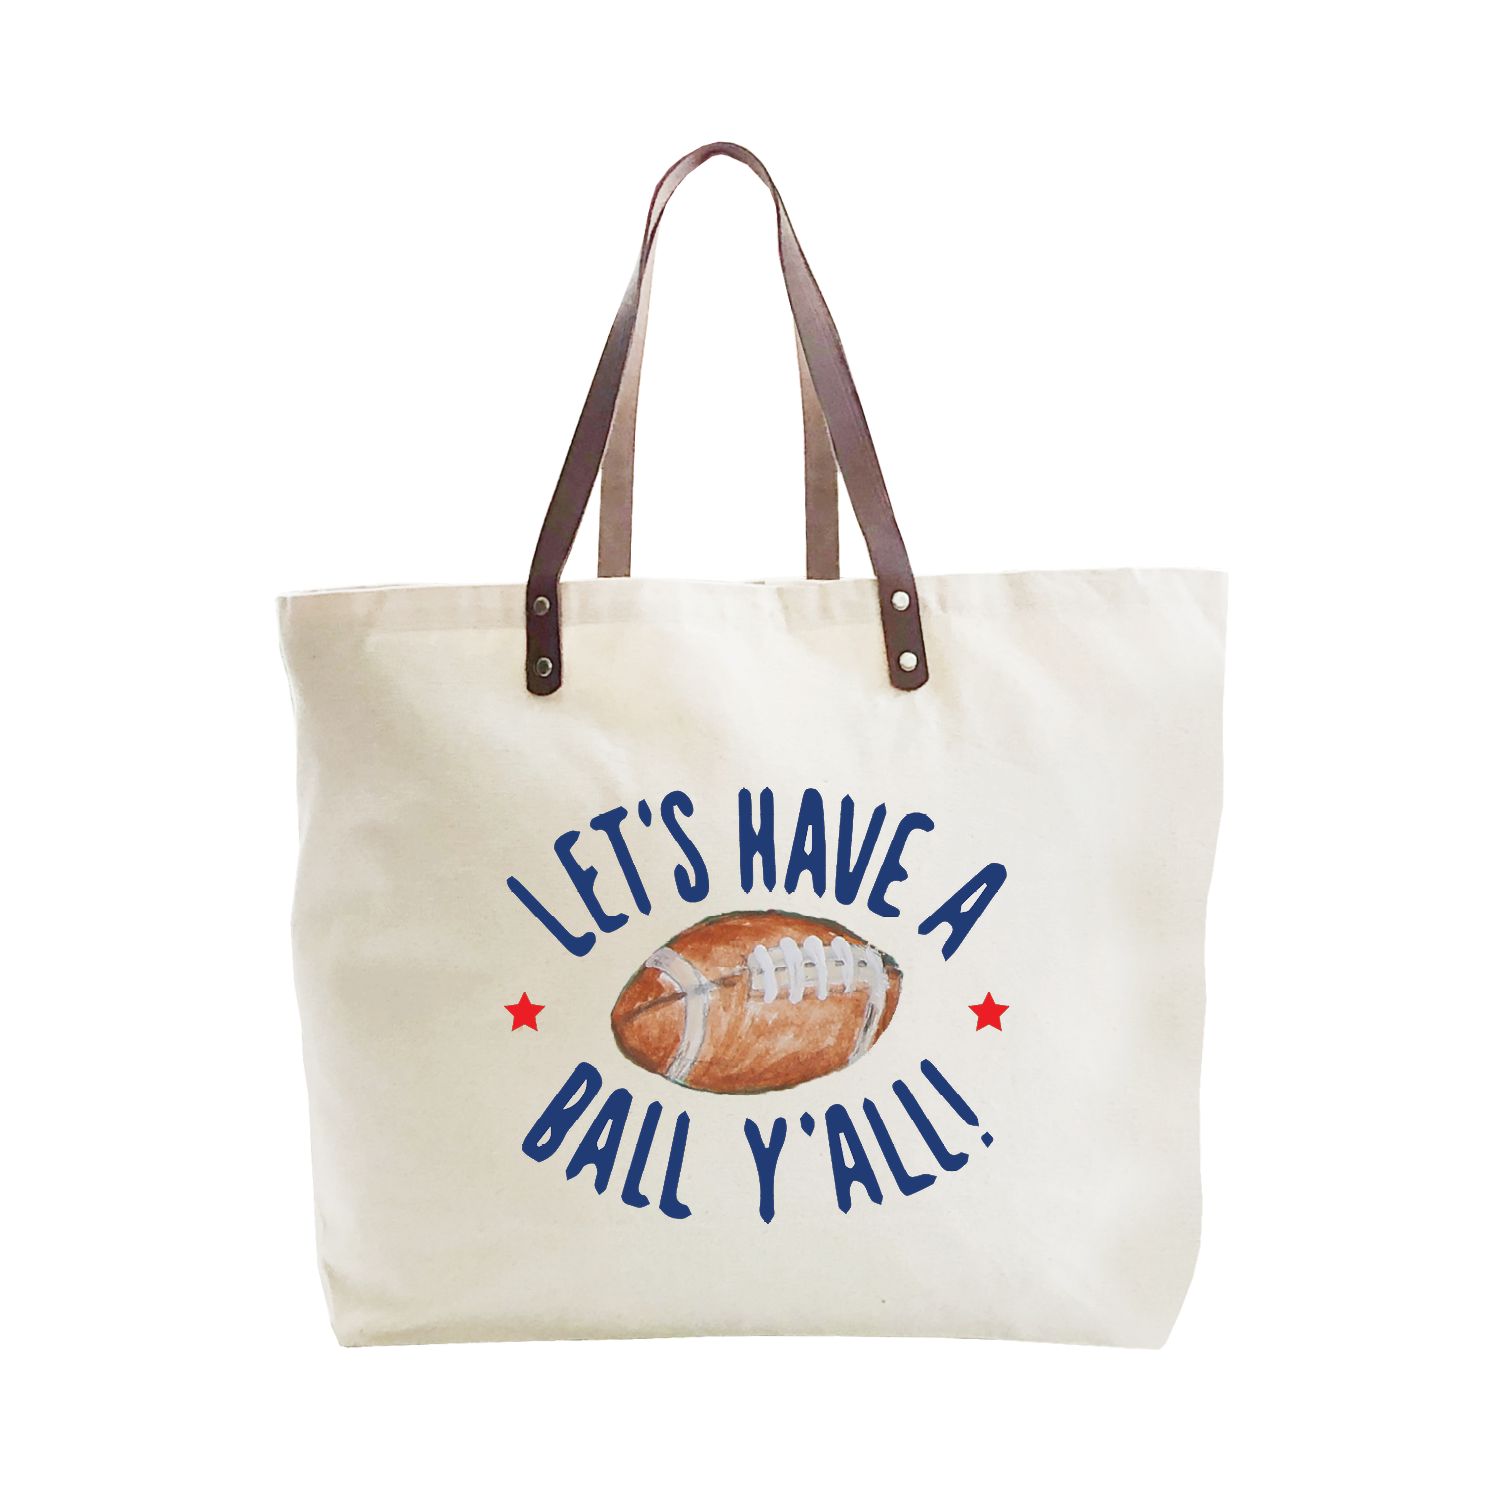 have a ball y'all large tote